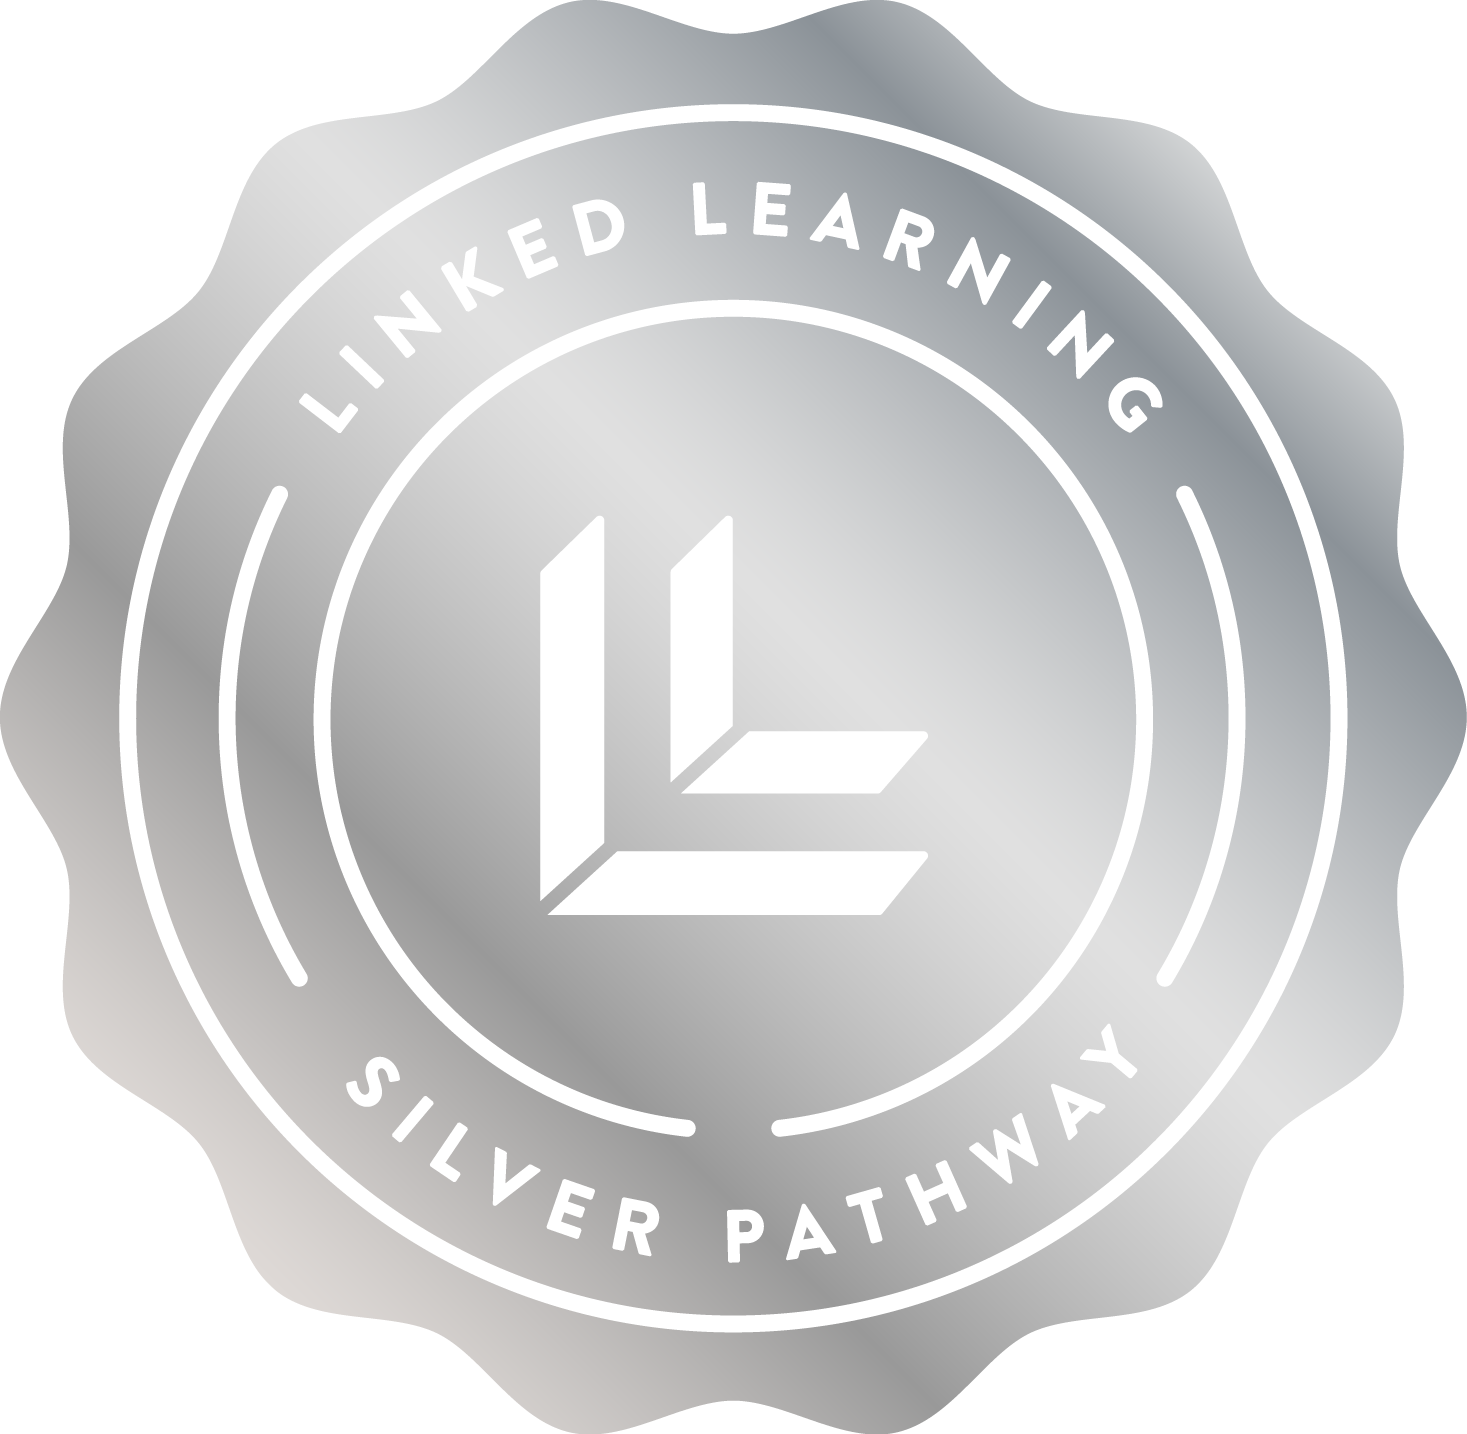 Linked Learning Silver Pathway Badge PNG